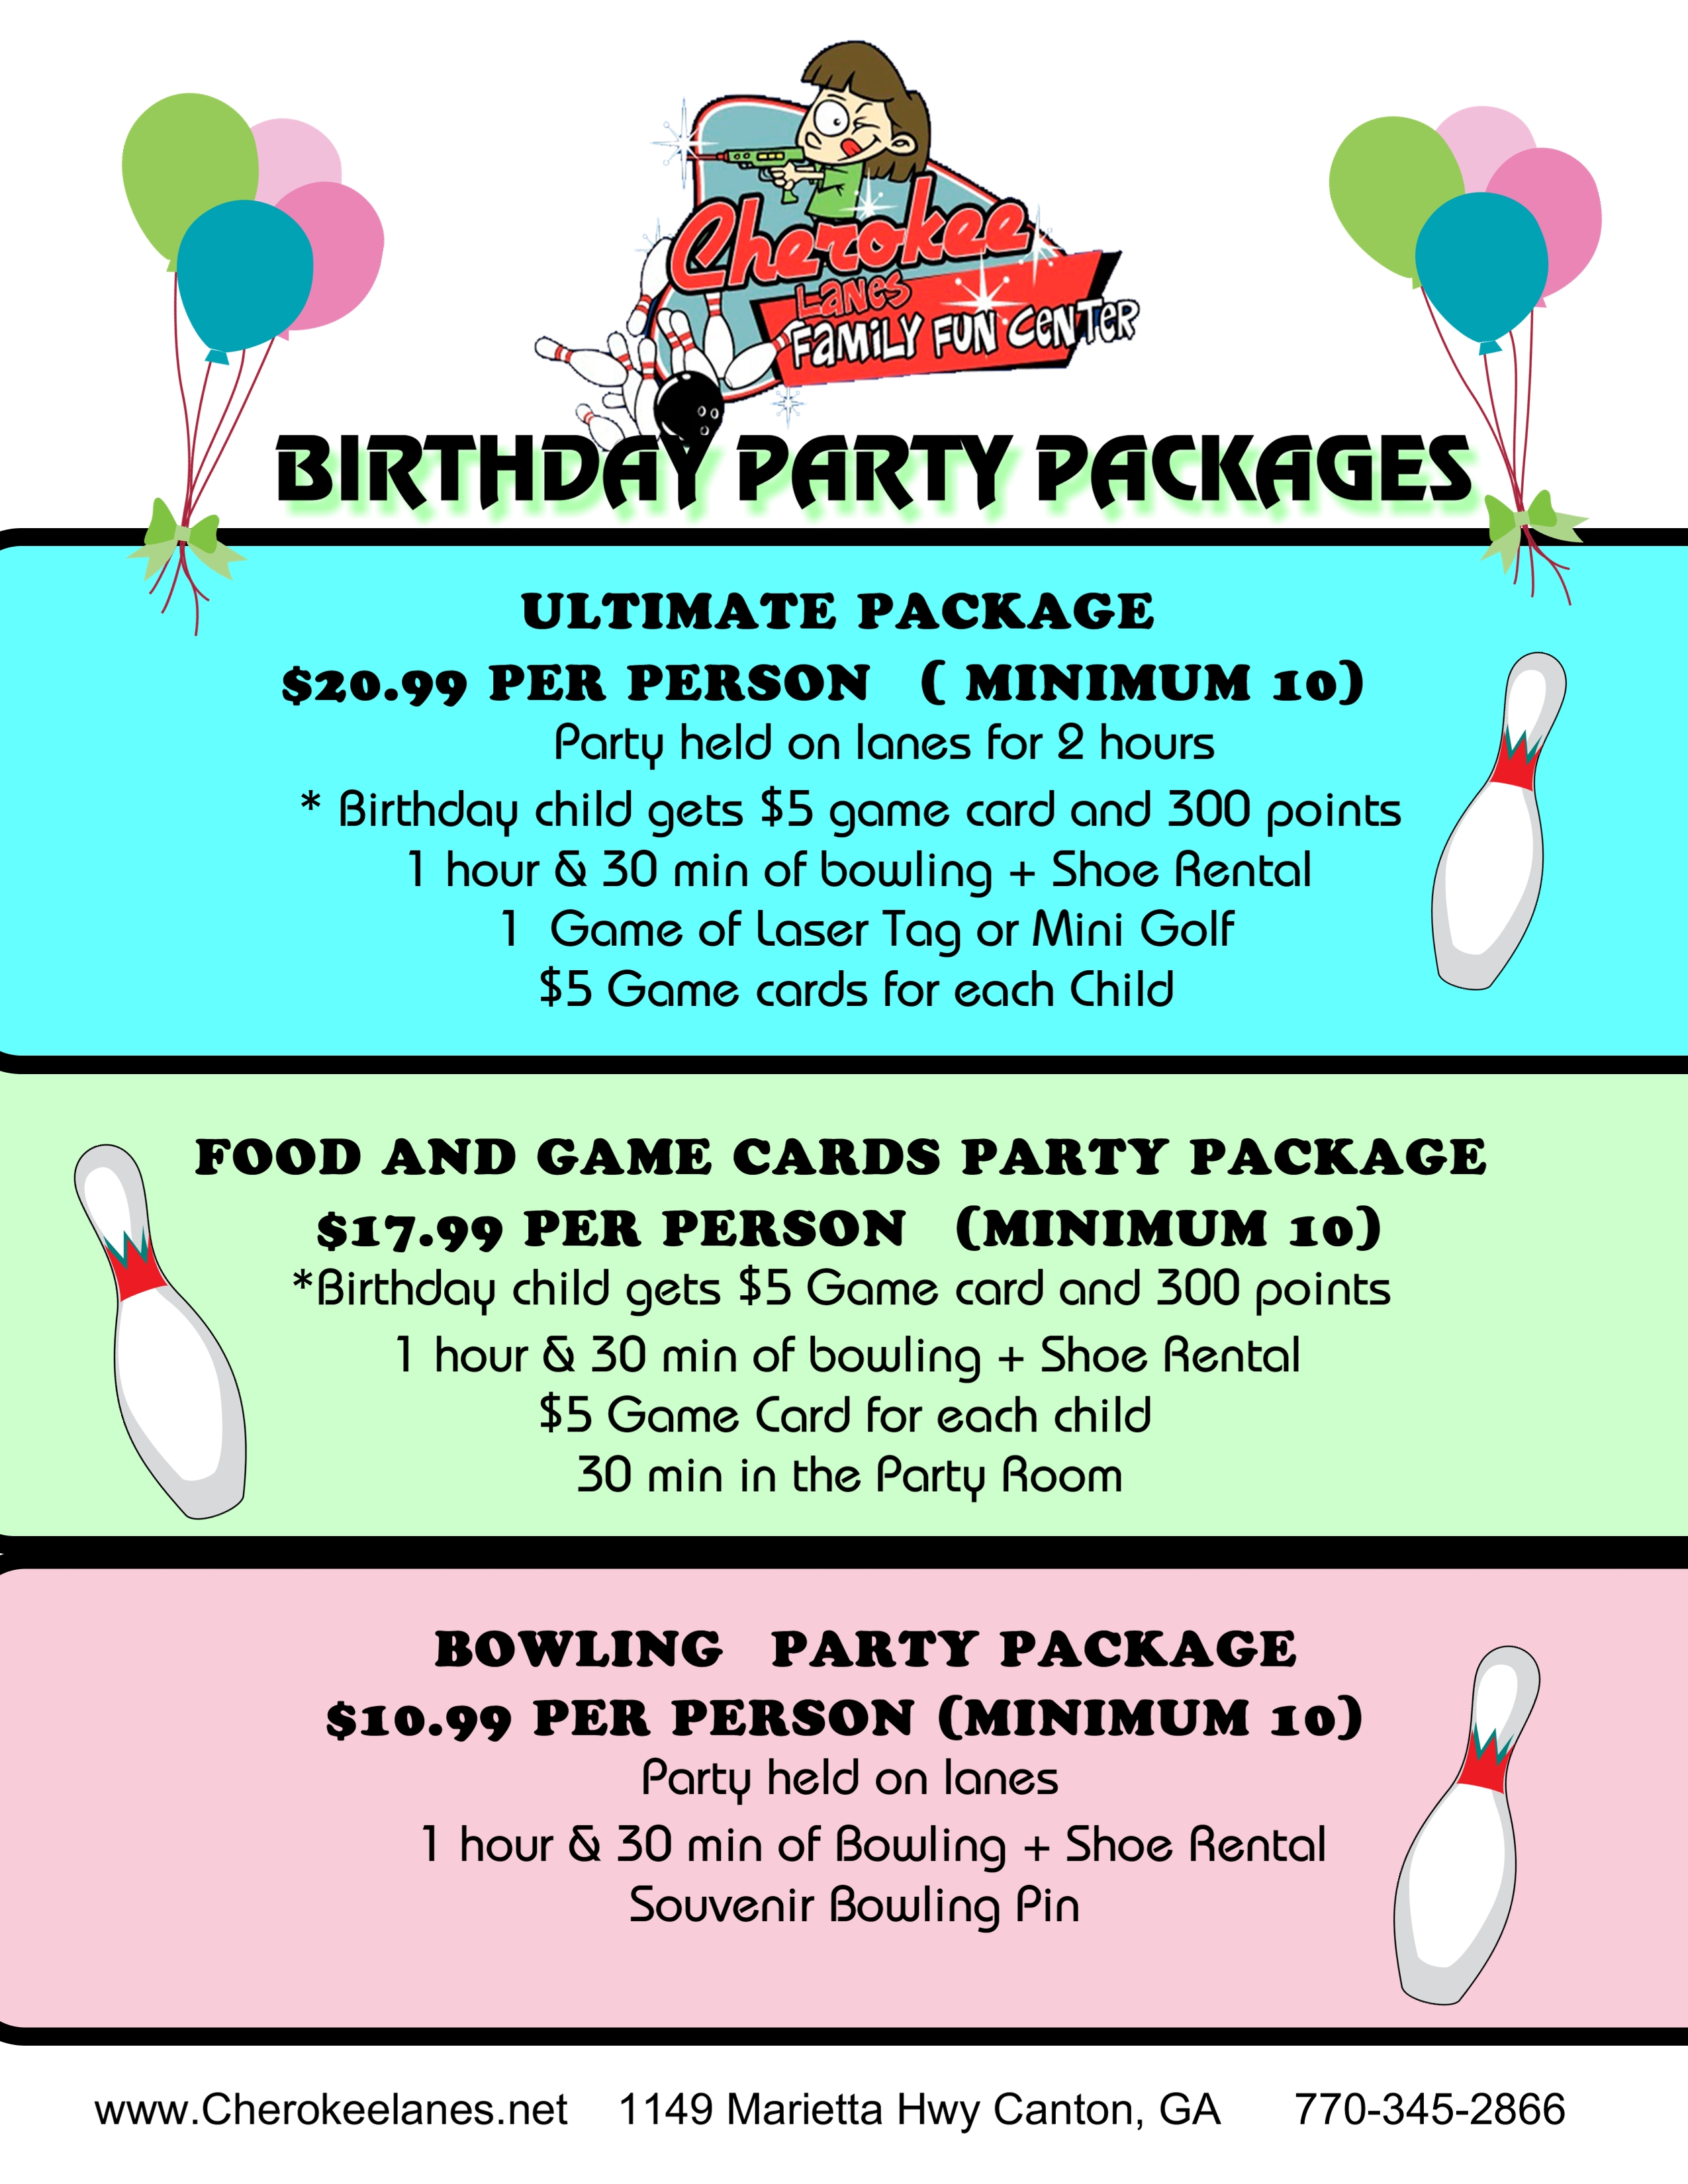 Inexpensive party packages